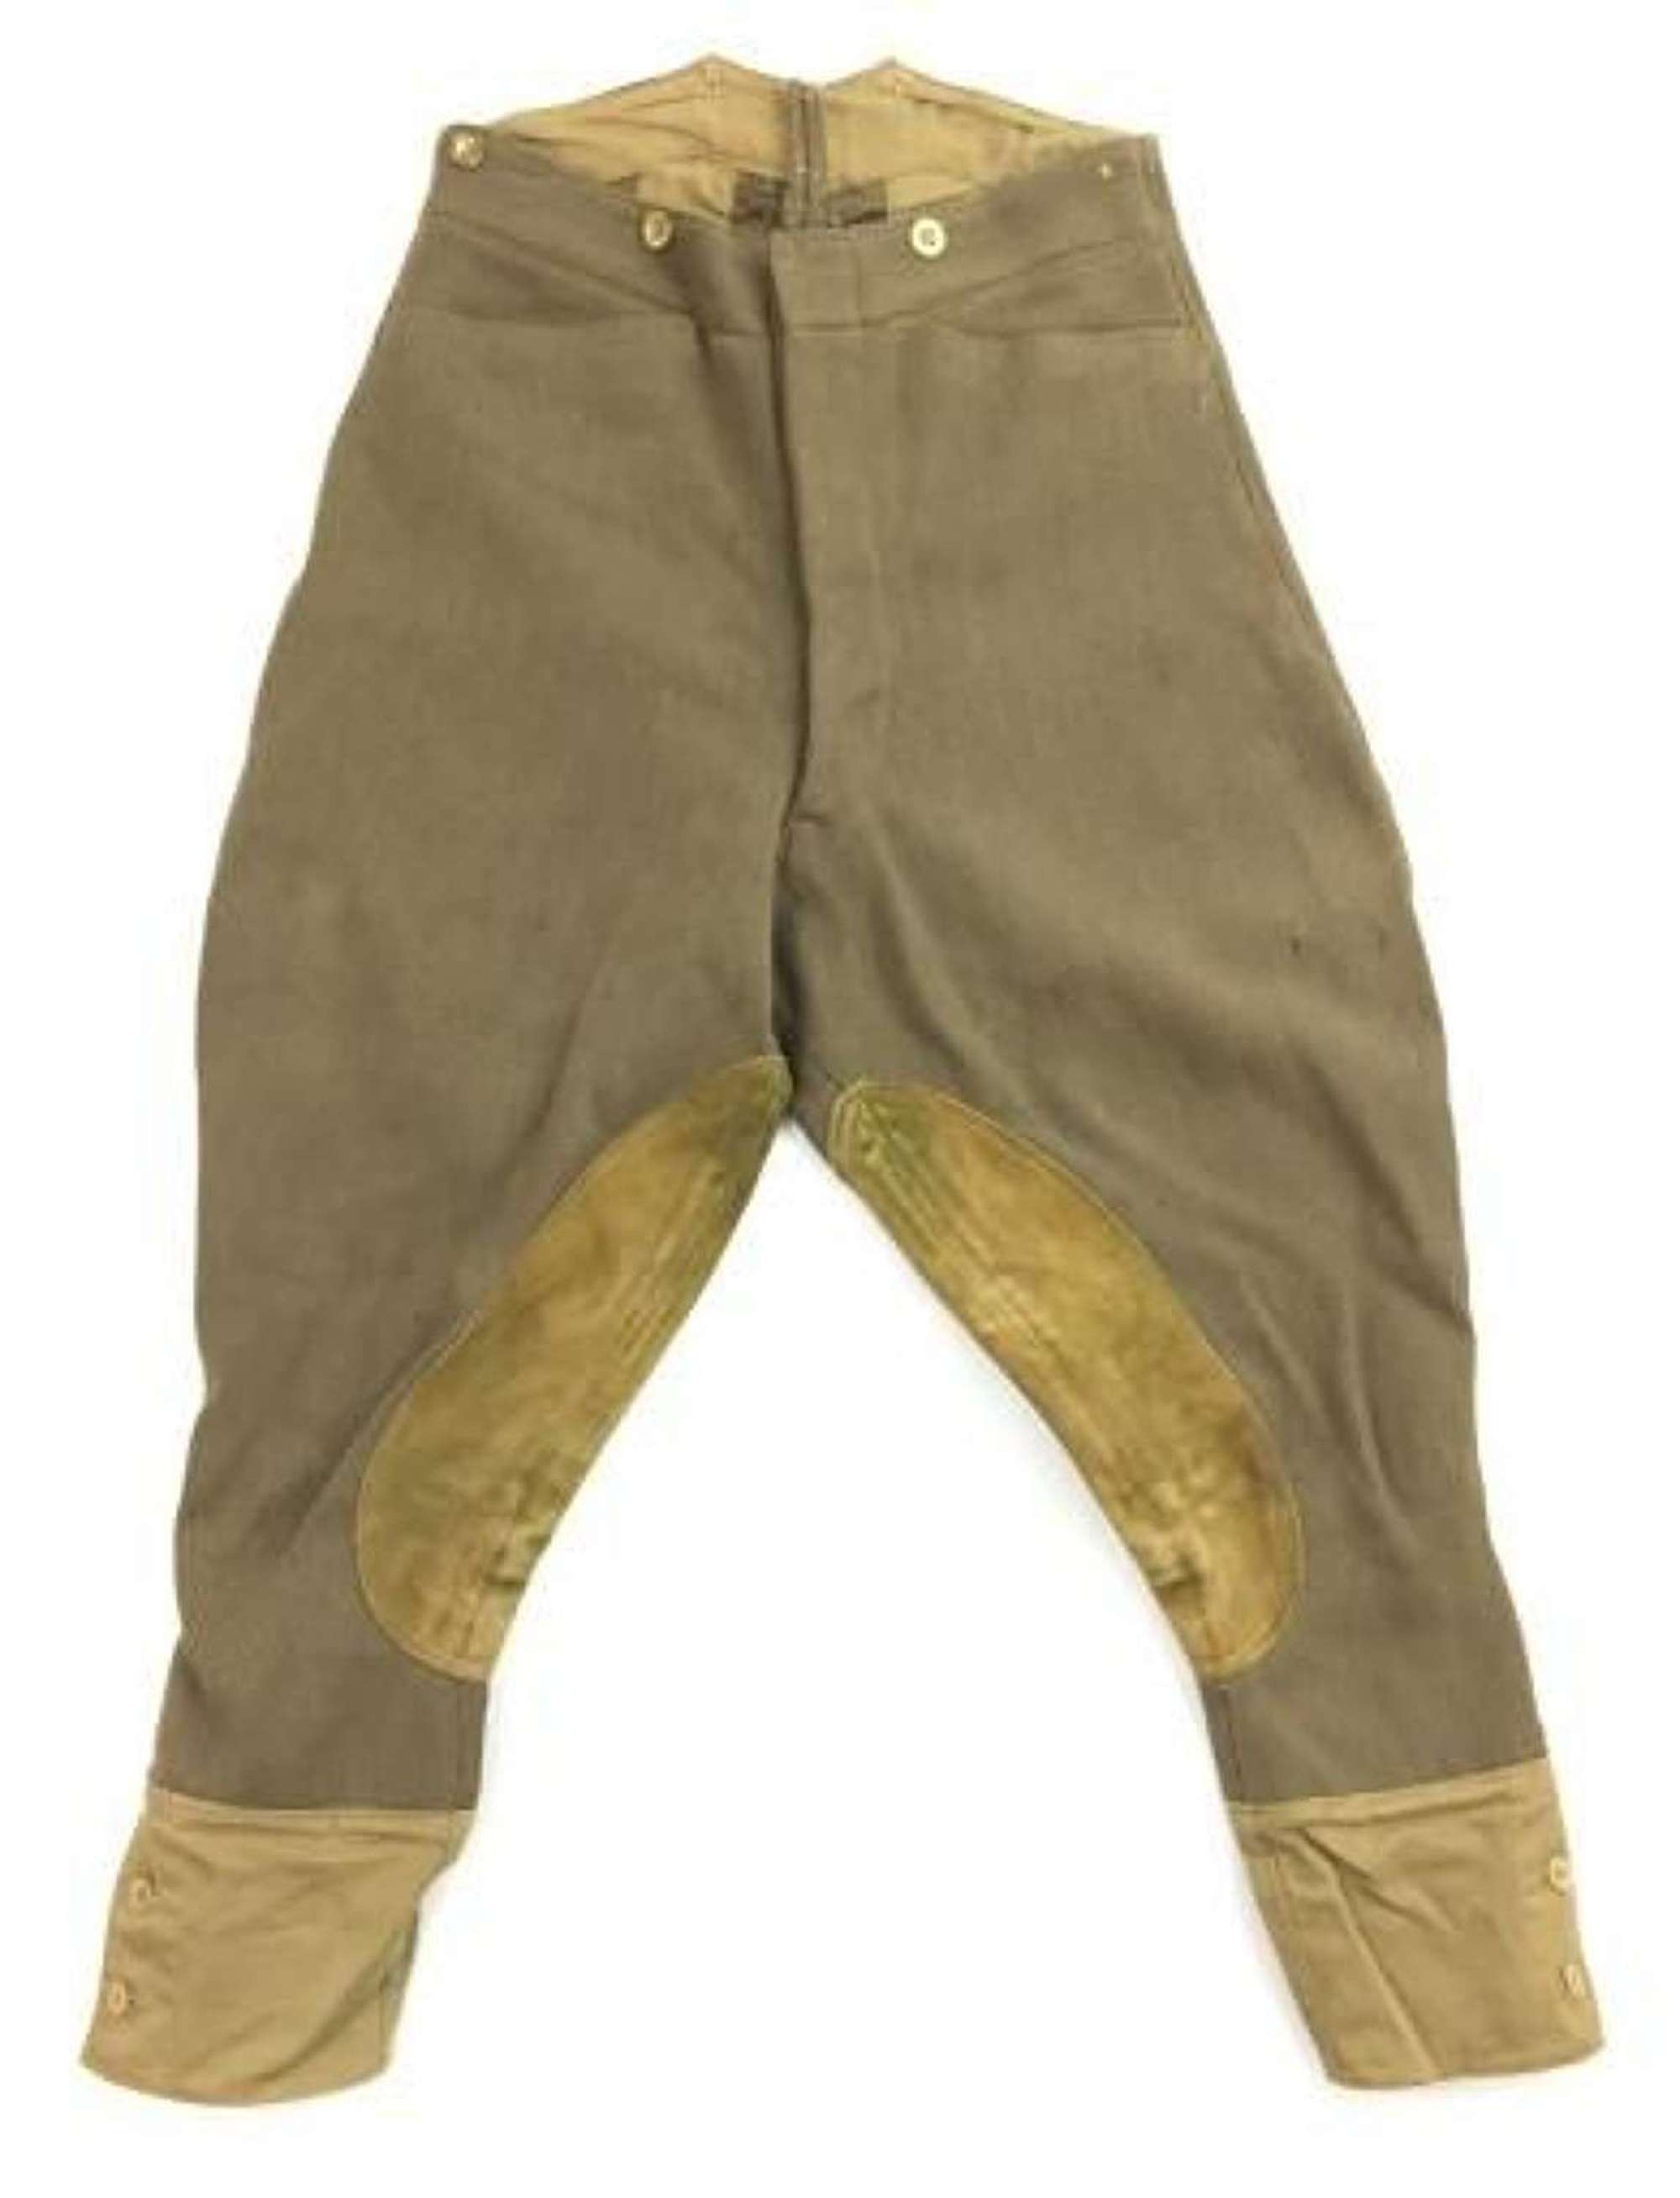 1937 Dated British Army Mounted Breeches